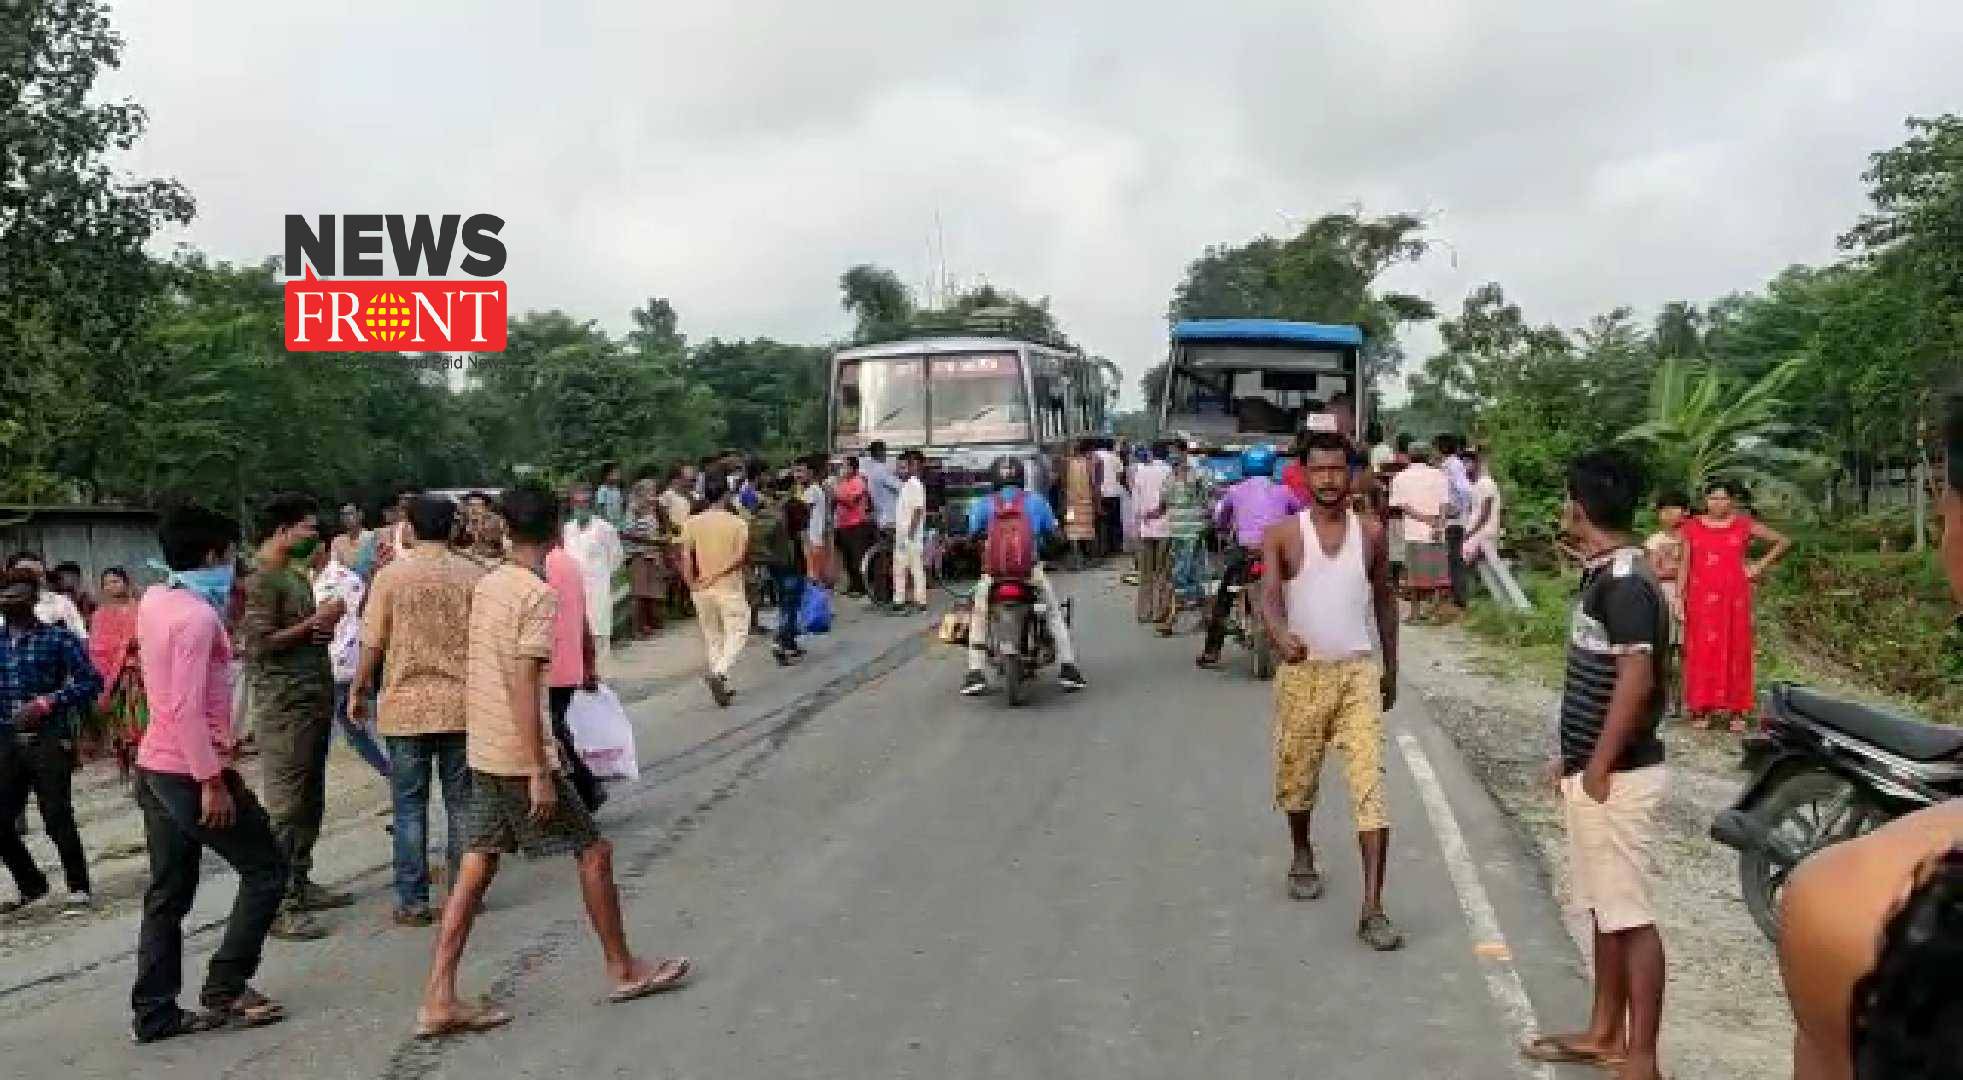 Bus accident | newsfront.co